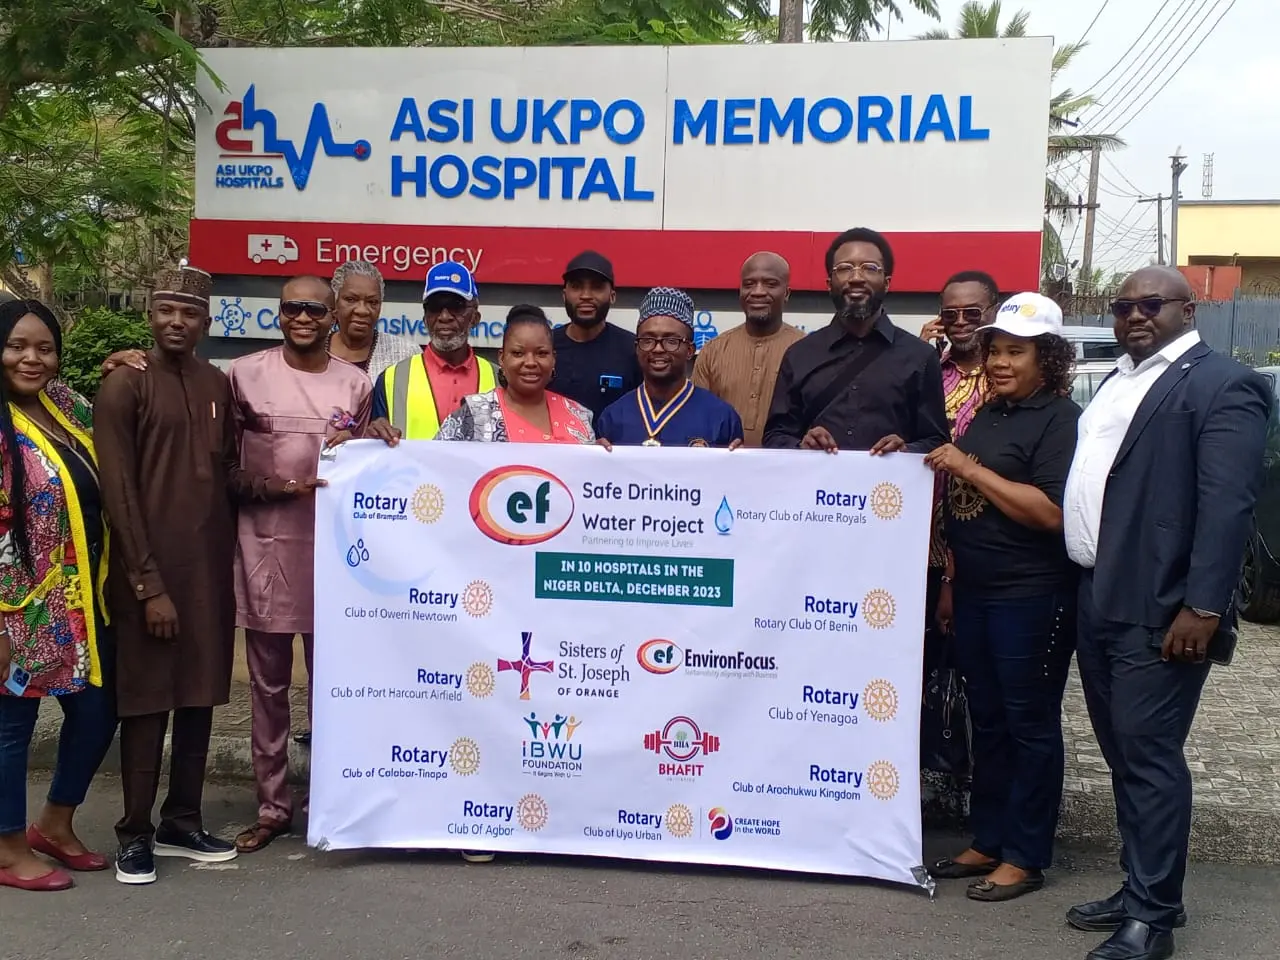 Members of Rotary Club in Calabar and officials of Asi Ukpo Hospital and Comprehensive Cancer Centre, Calabar on Thursday (21 Dec 2023) during the Inauguration of a membrane-ultra-filter in the hospital